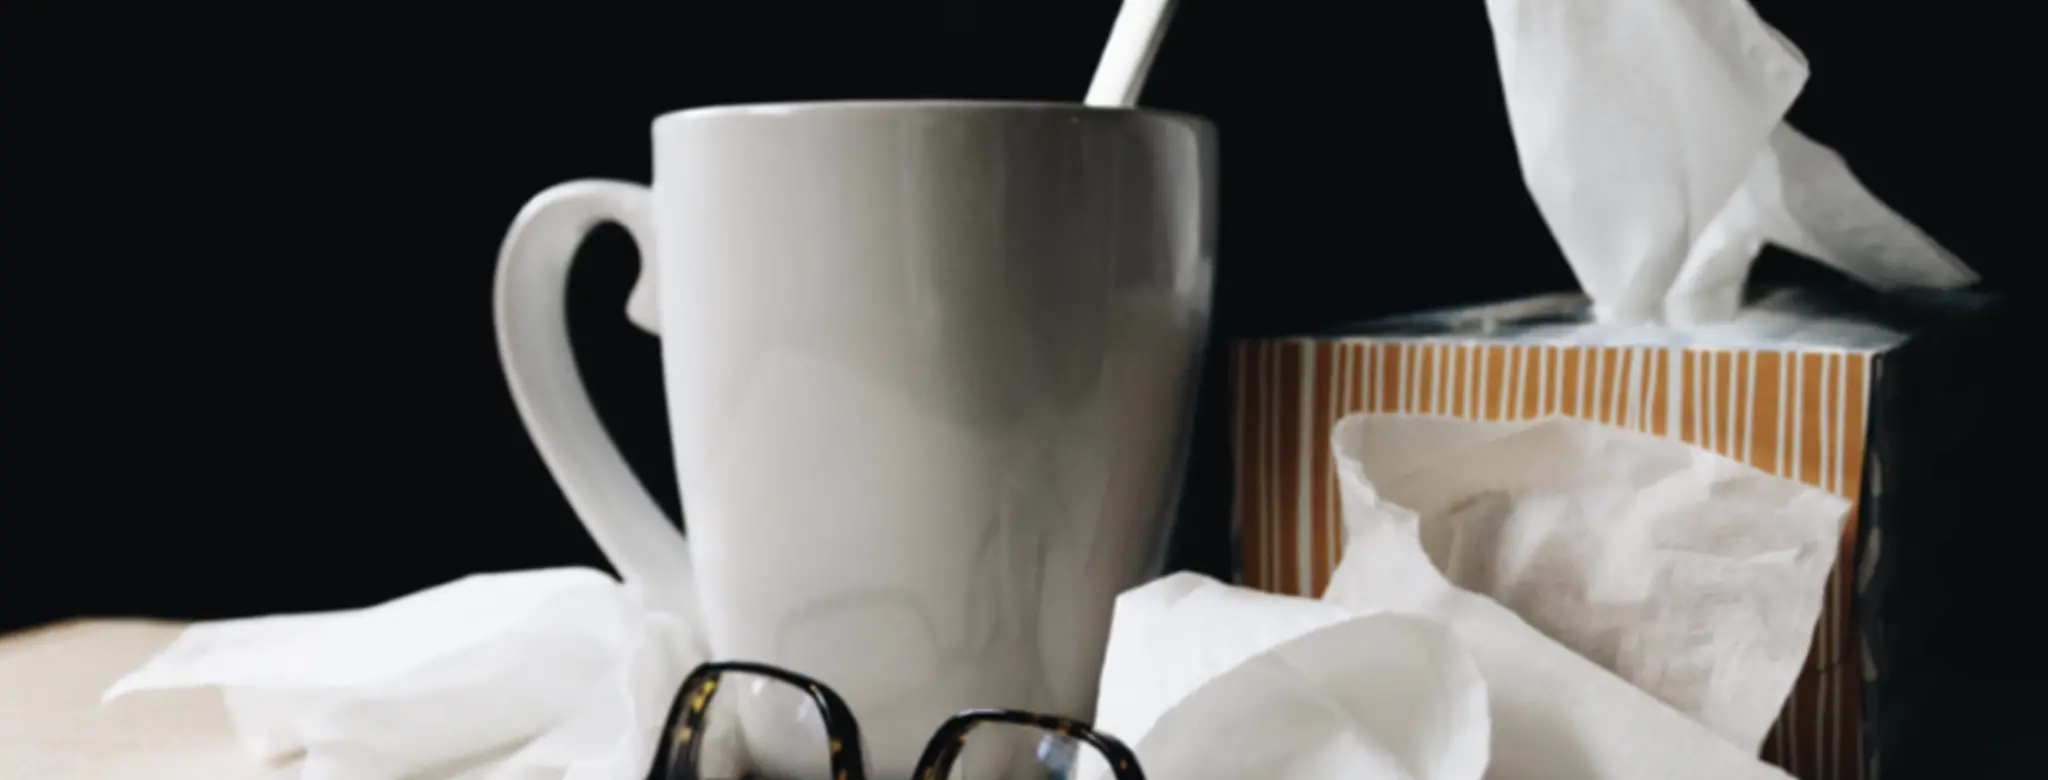 tea cup glasses and tissues on desk